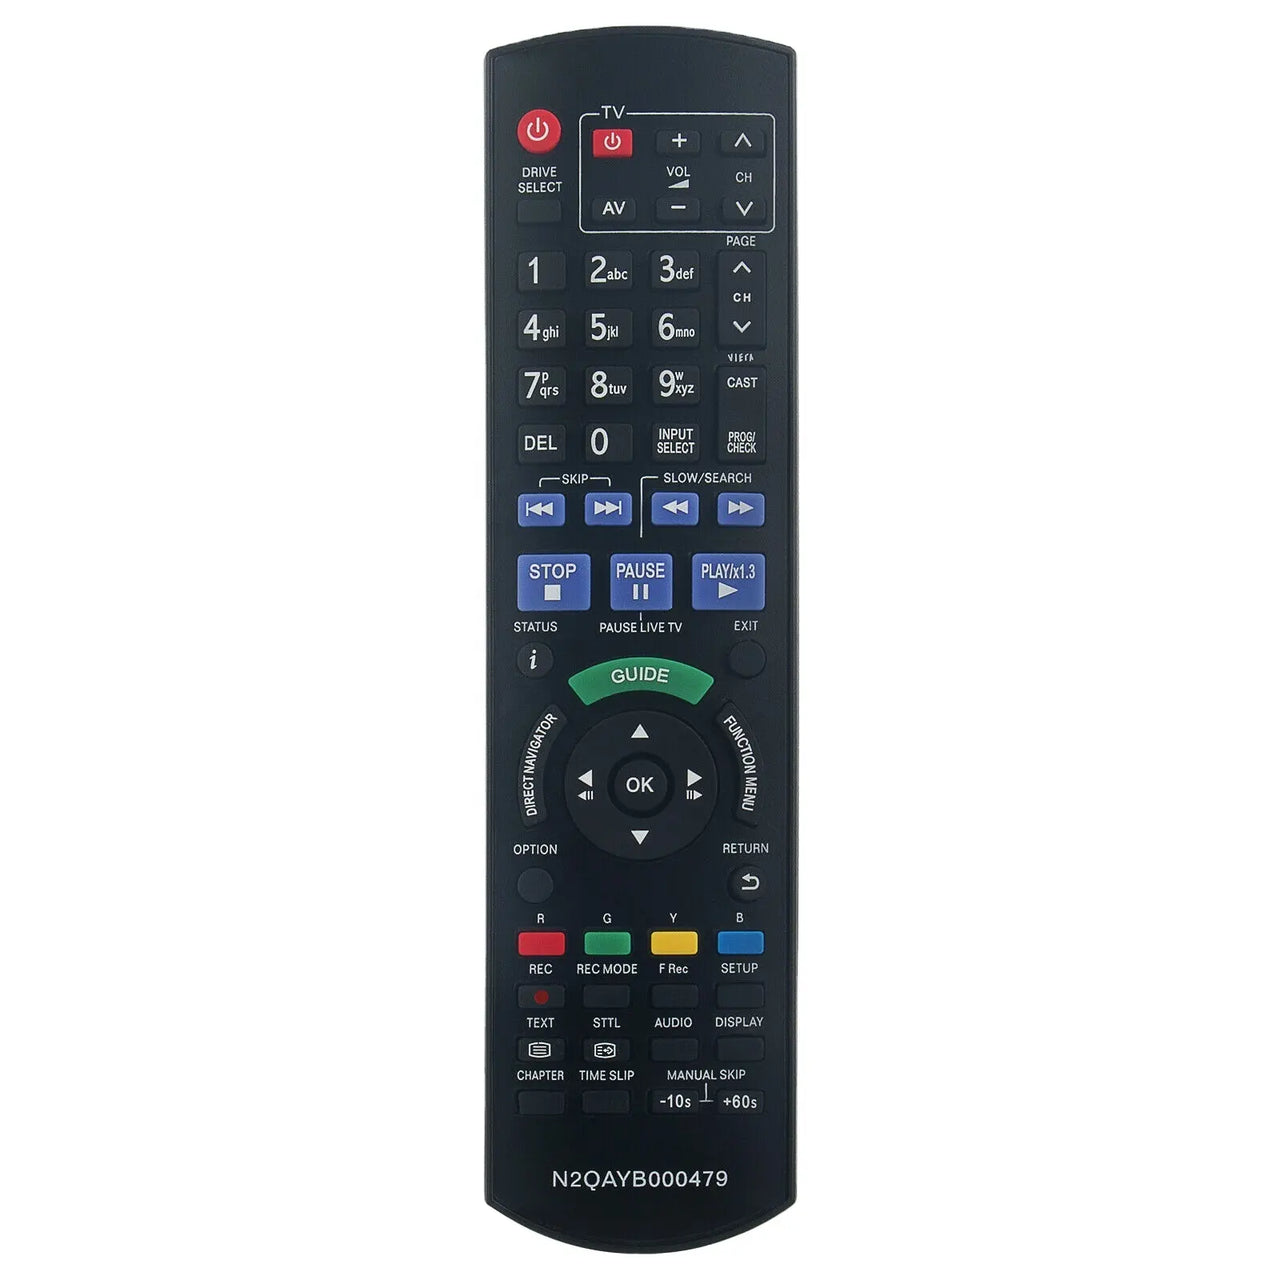 N2QAYB000479 Replacement Remote for Panasonic DVD Recorders